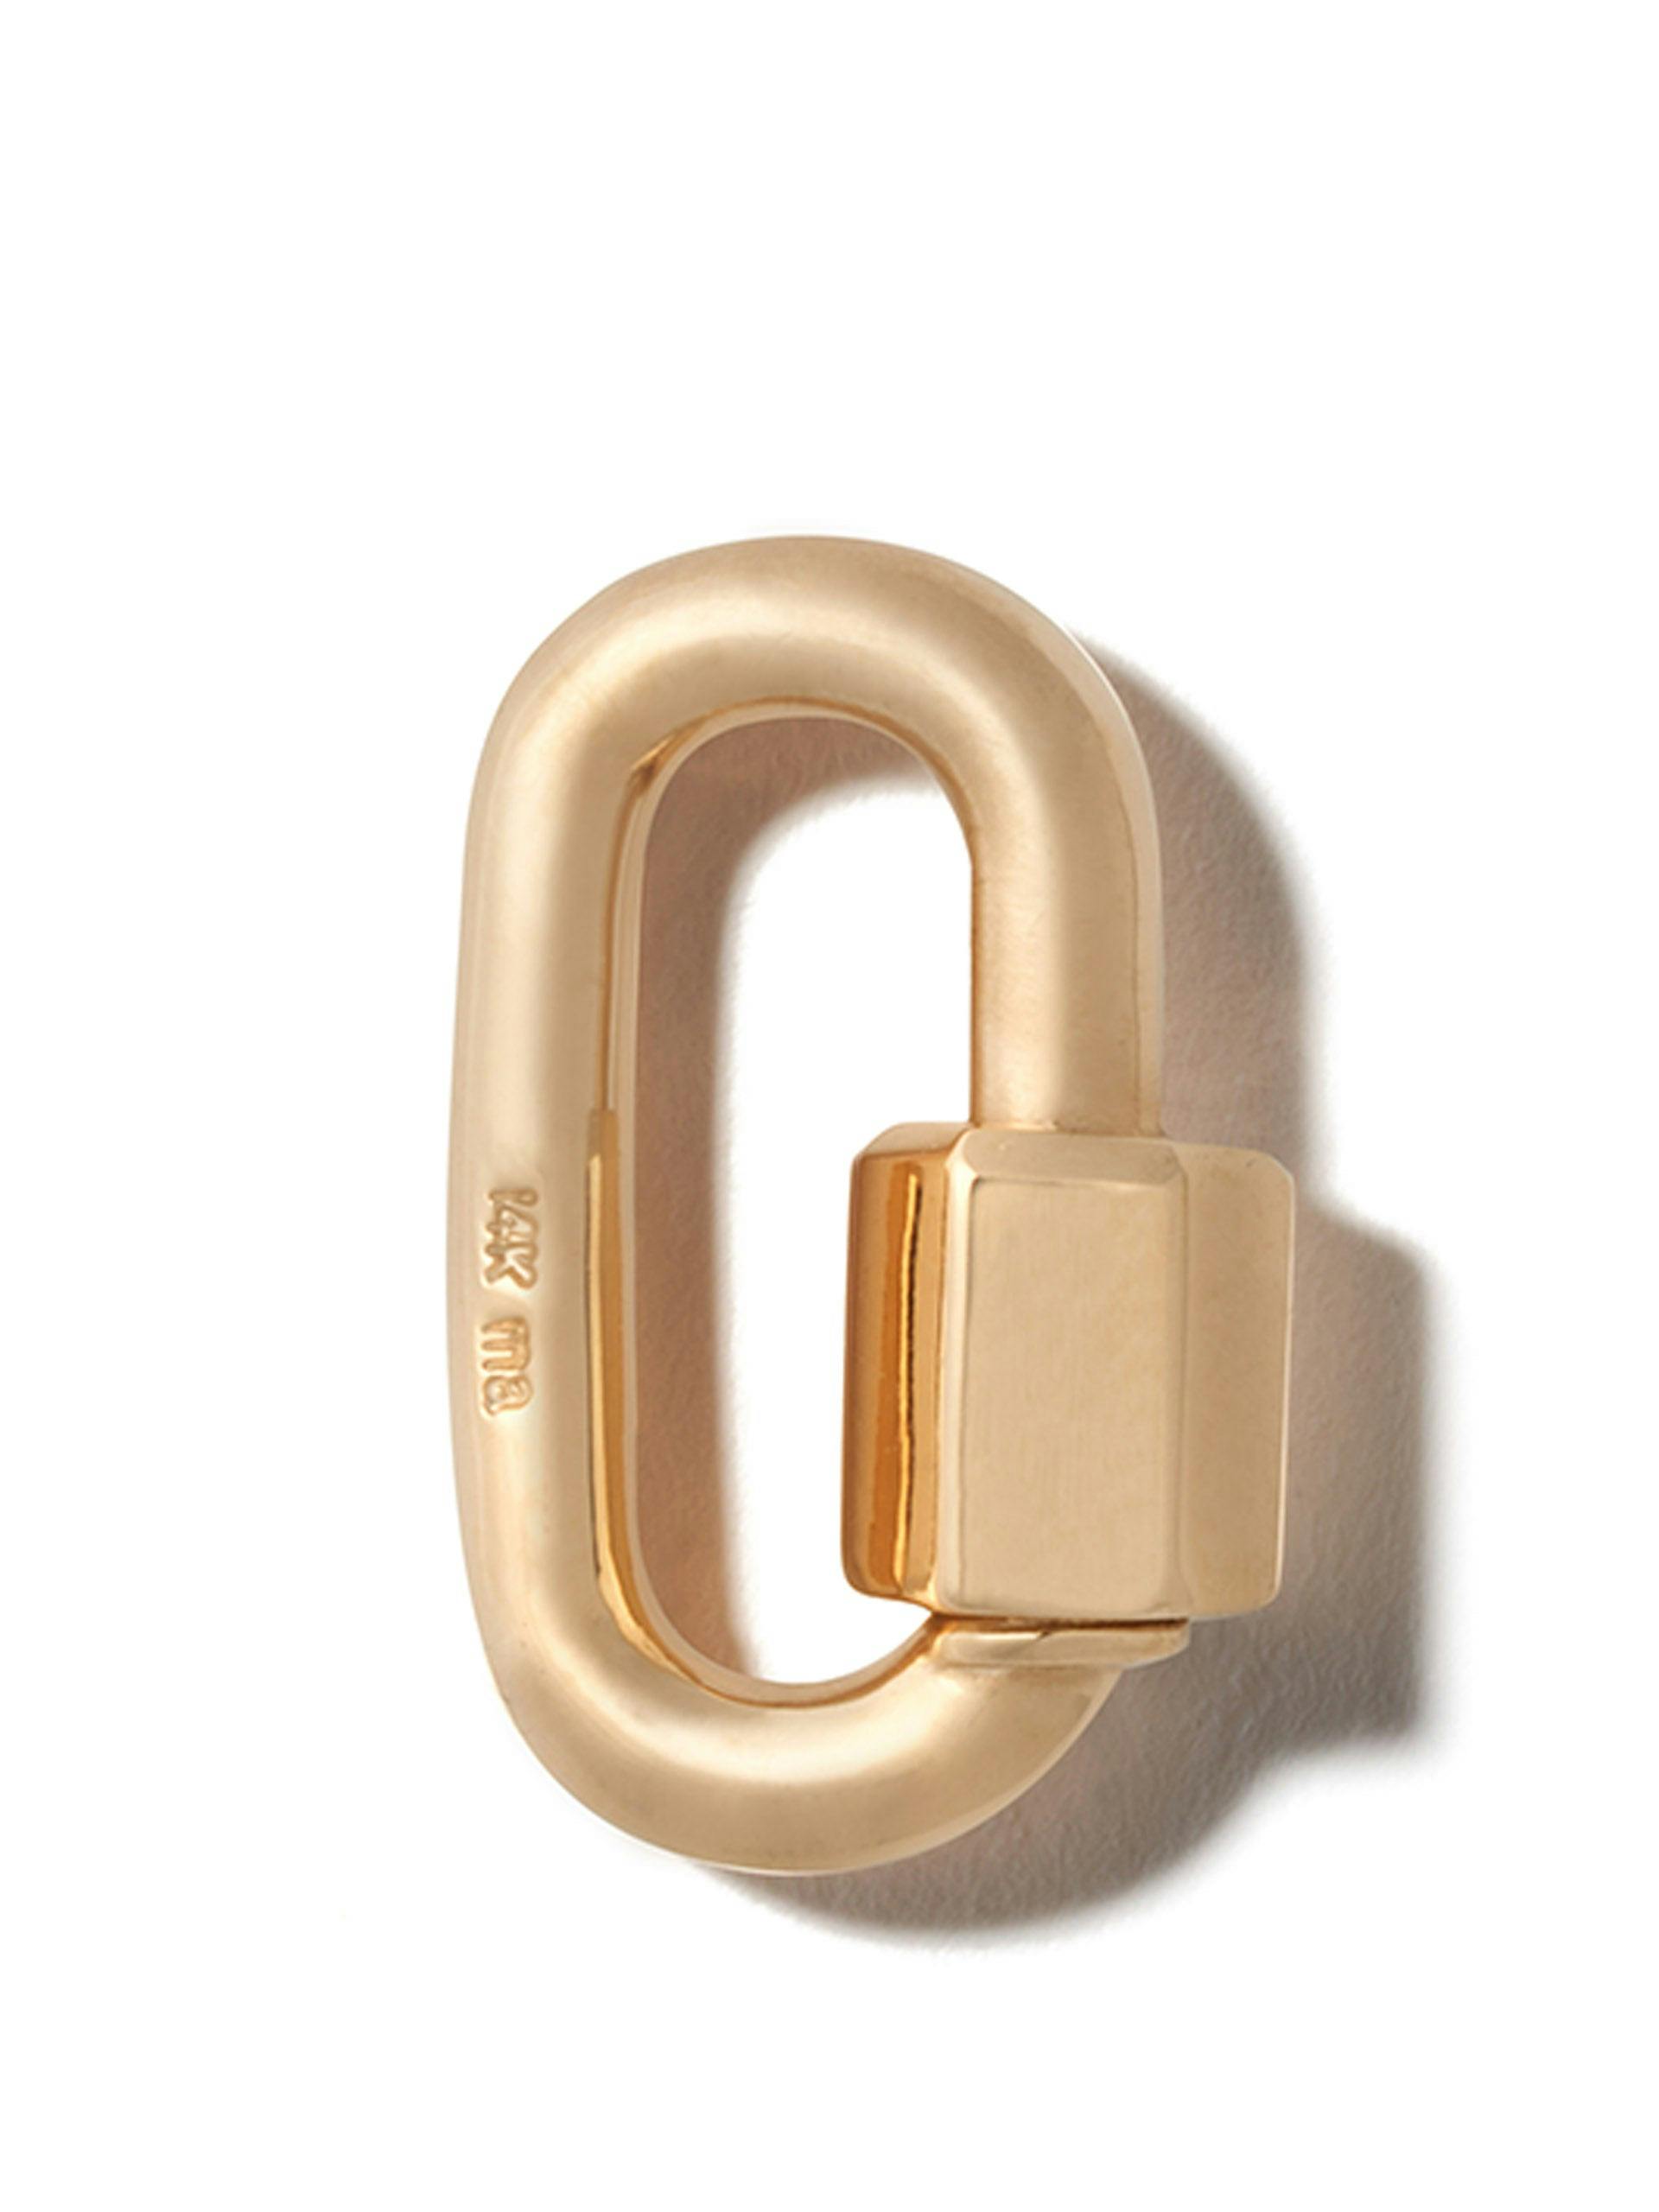 Chubby gold carabiner